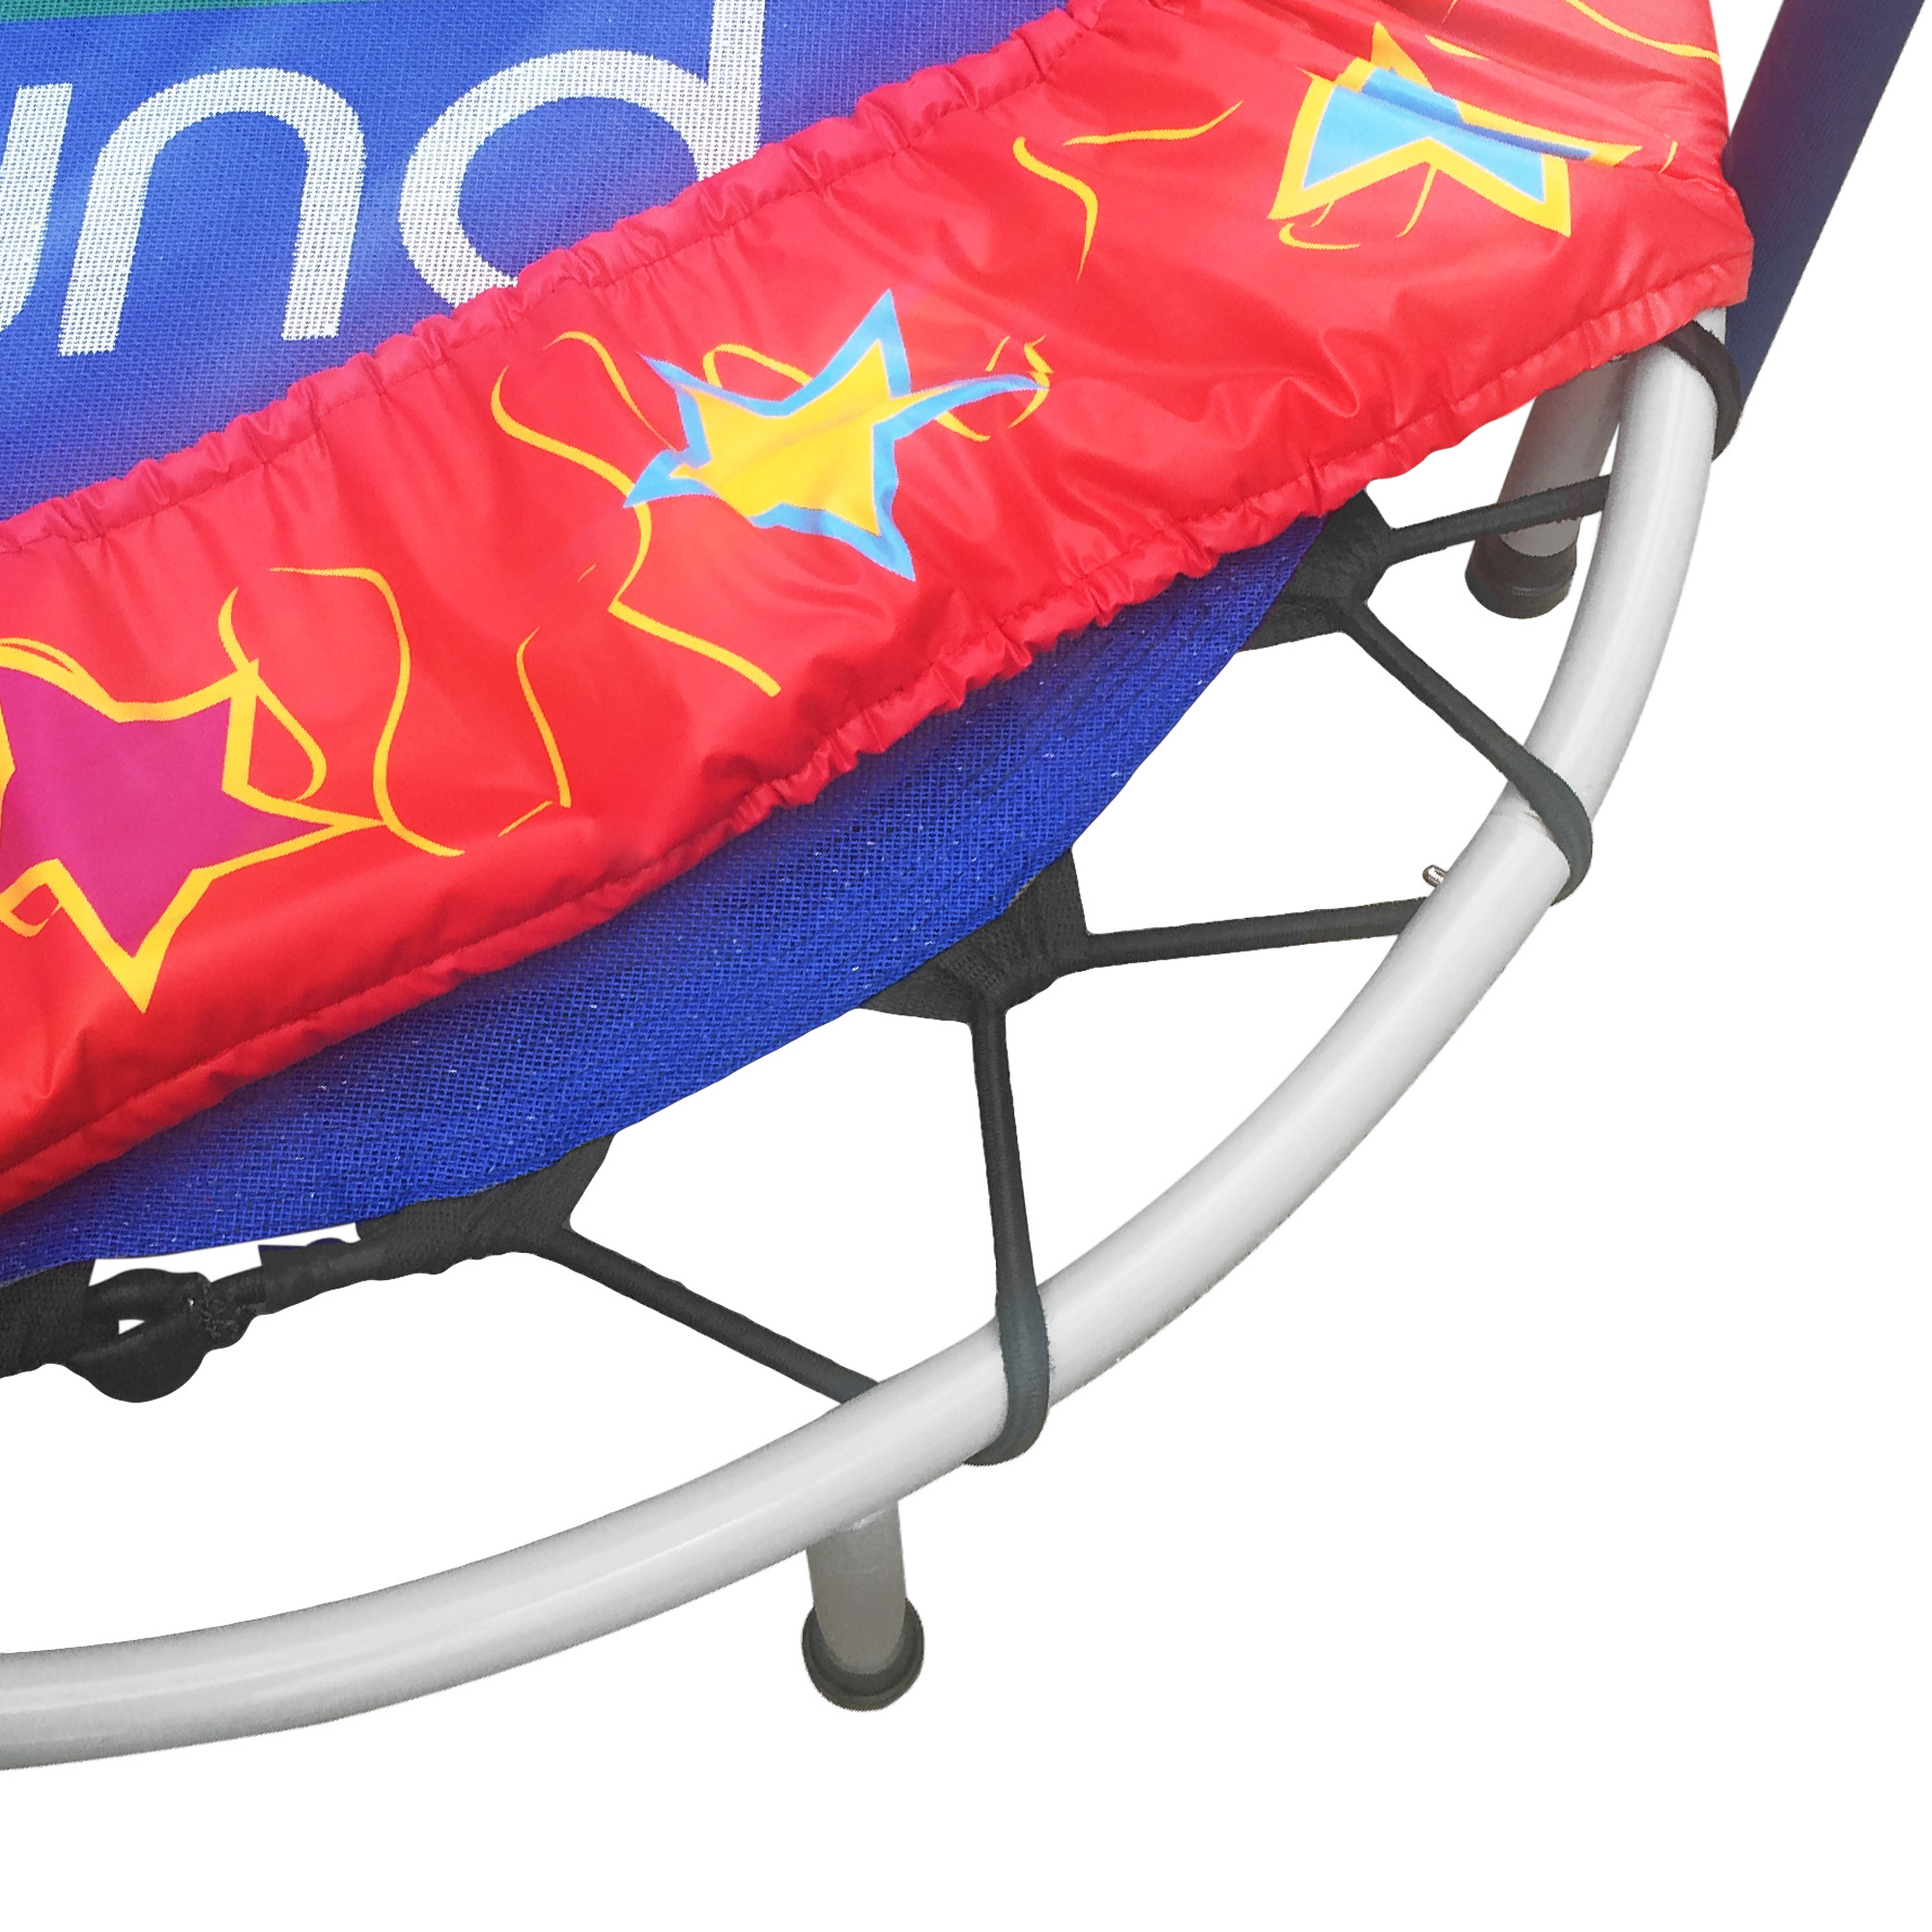 Pure Fun 36-Inch Trampoline for Kids, with Handrail, Red/Blue - image 3 of 4